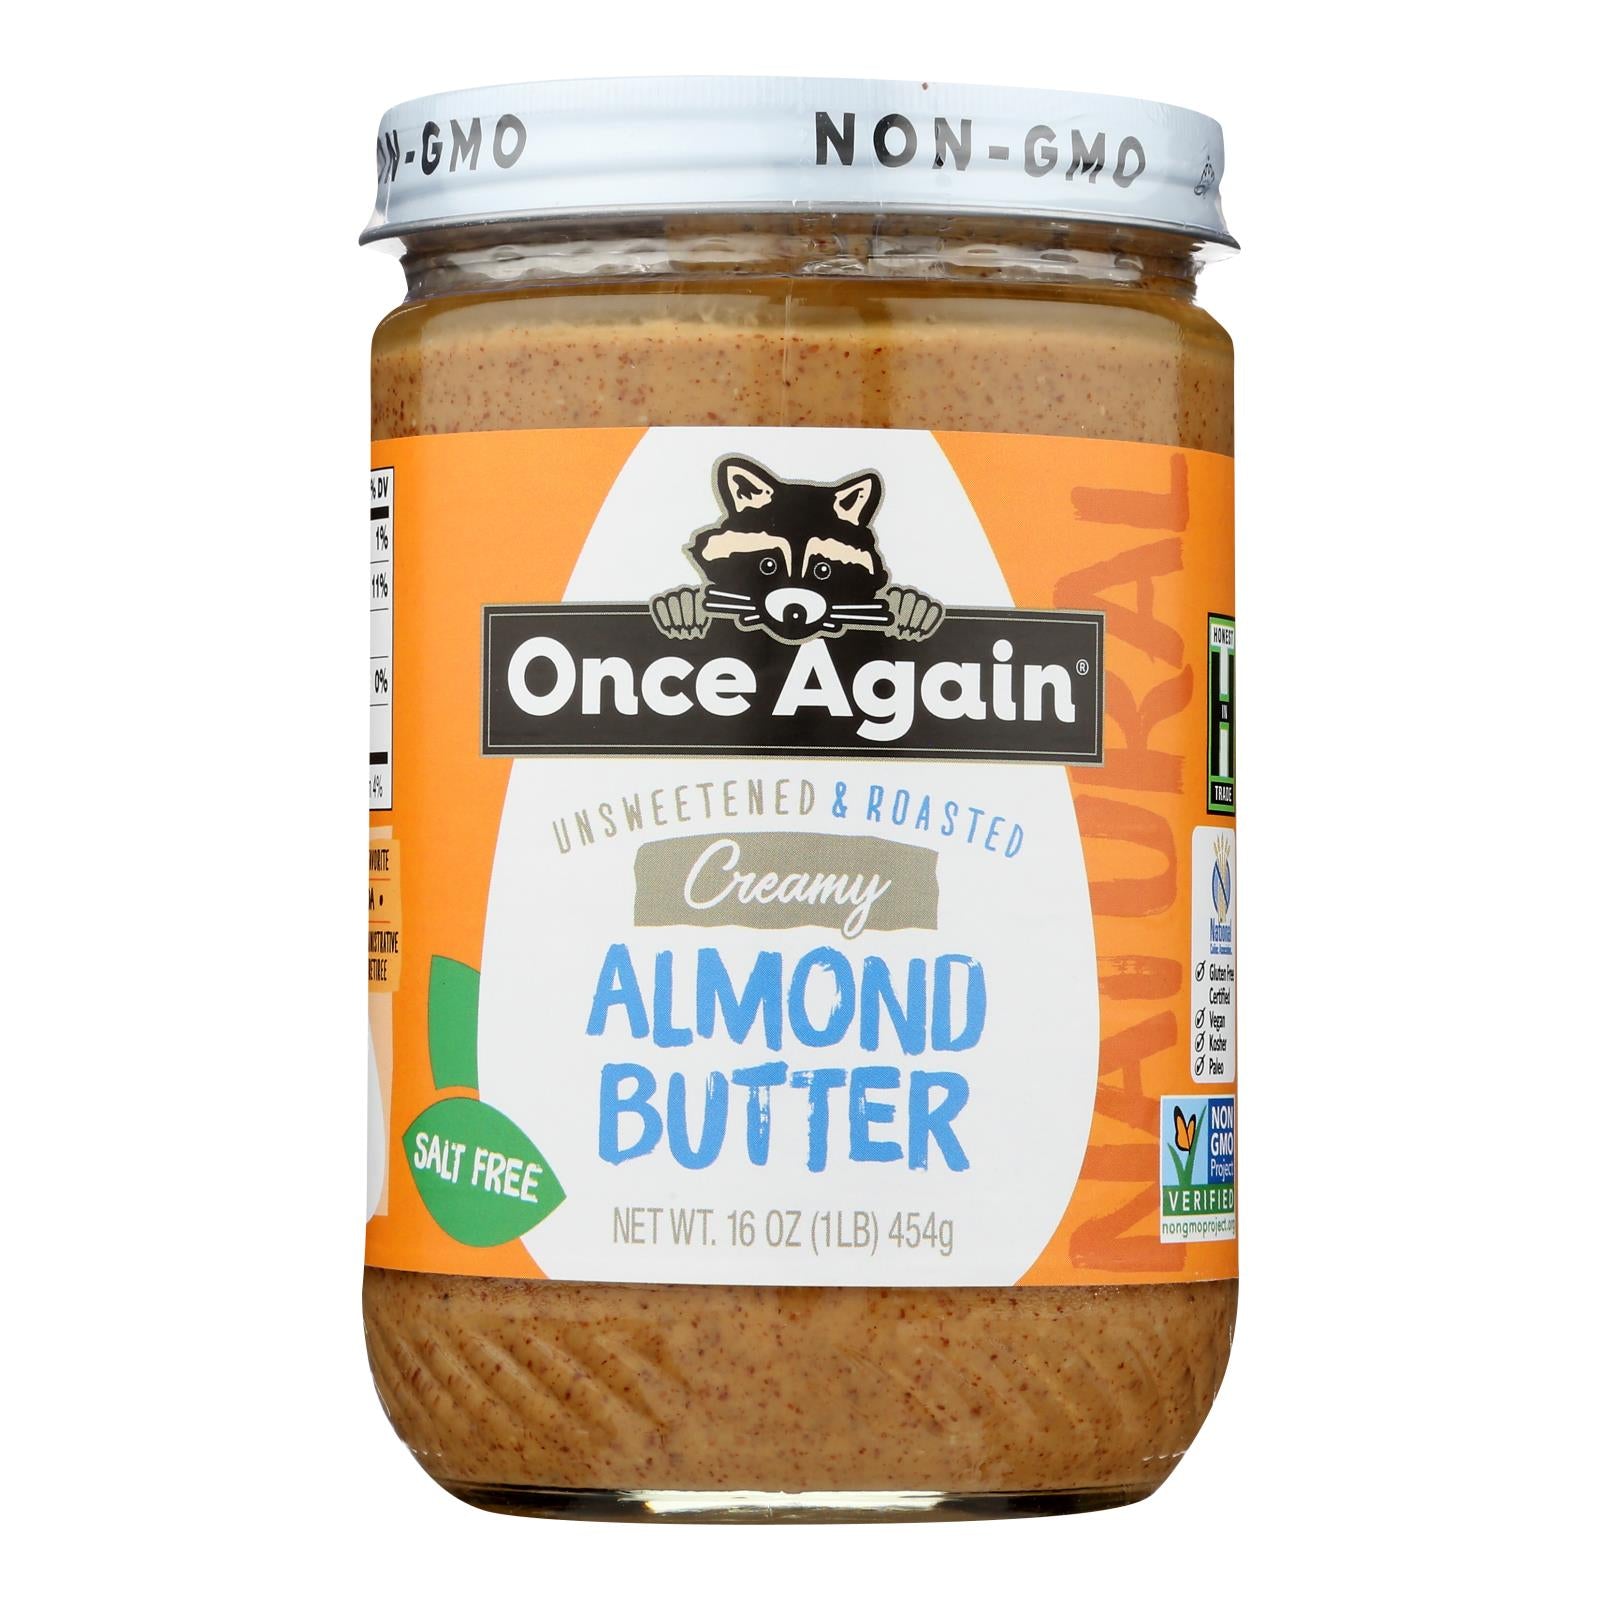 Once Again - Almond Butter Smth Ns - Case Of 6-16 Oz - Whole Green Foods